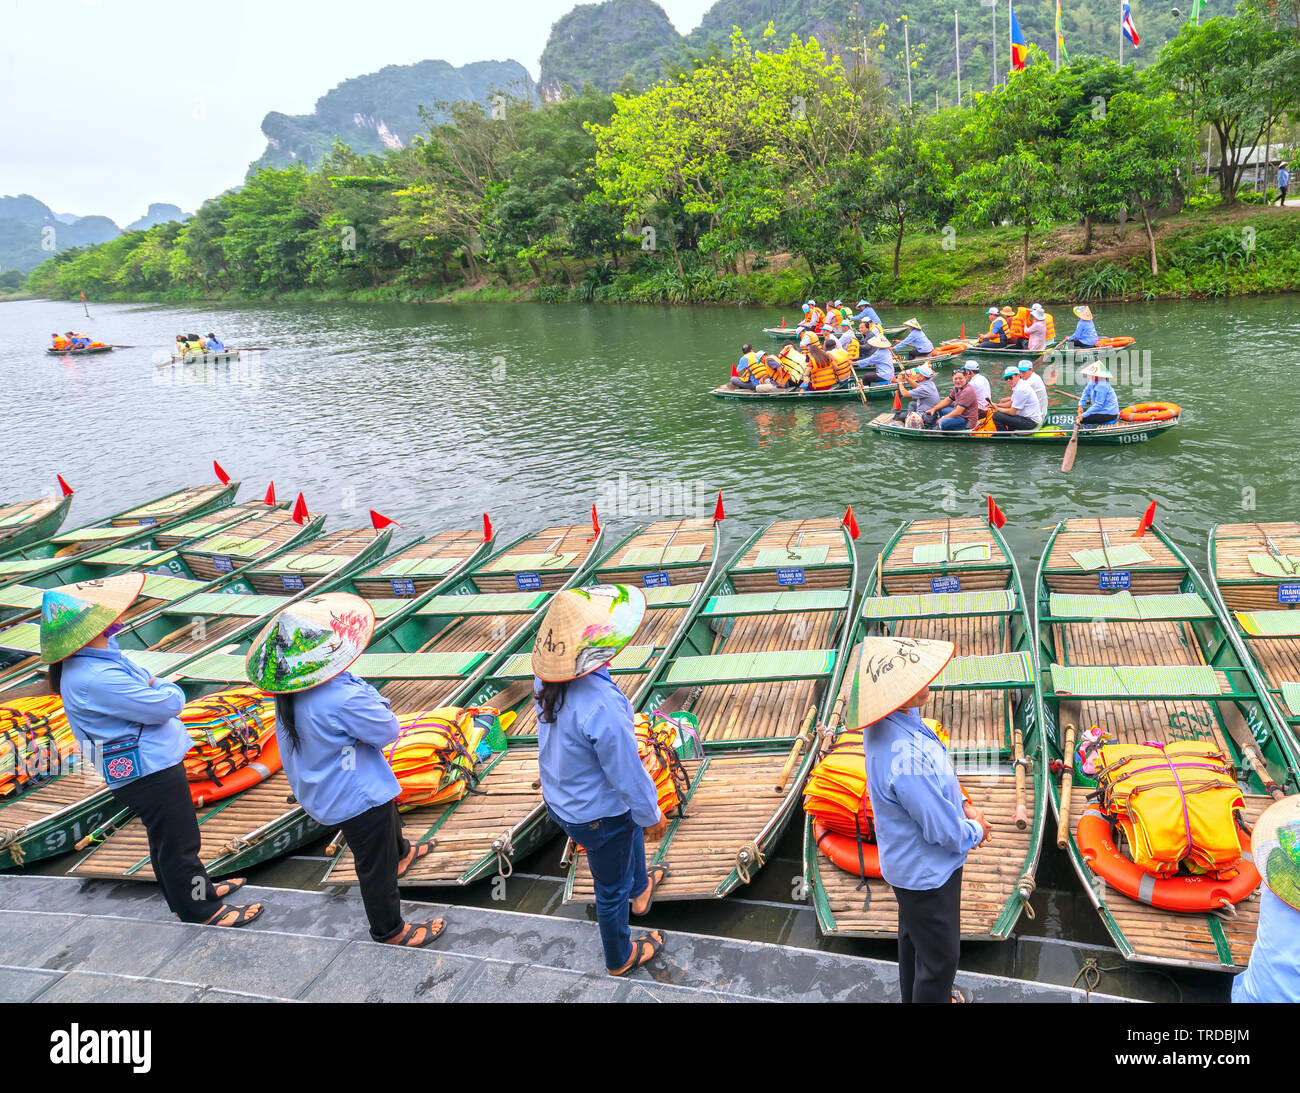 Tourists leaving marina travel to visit Ecotourism the natural landscape in small boat along the river Stock Photo